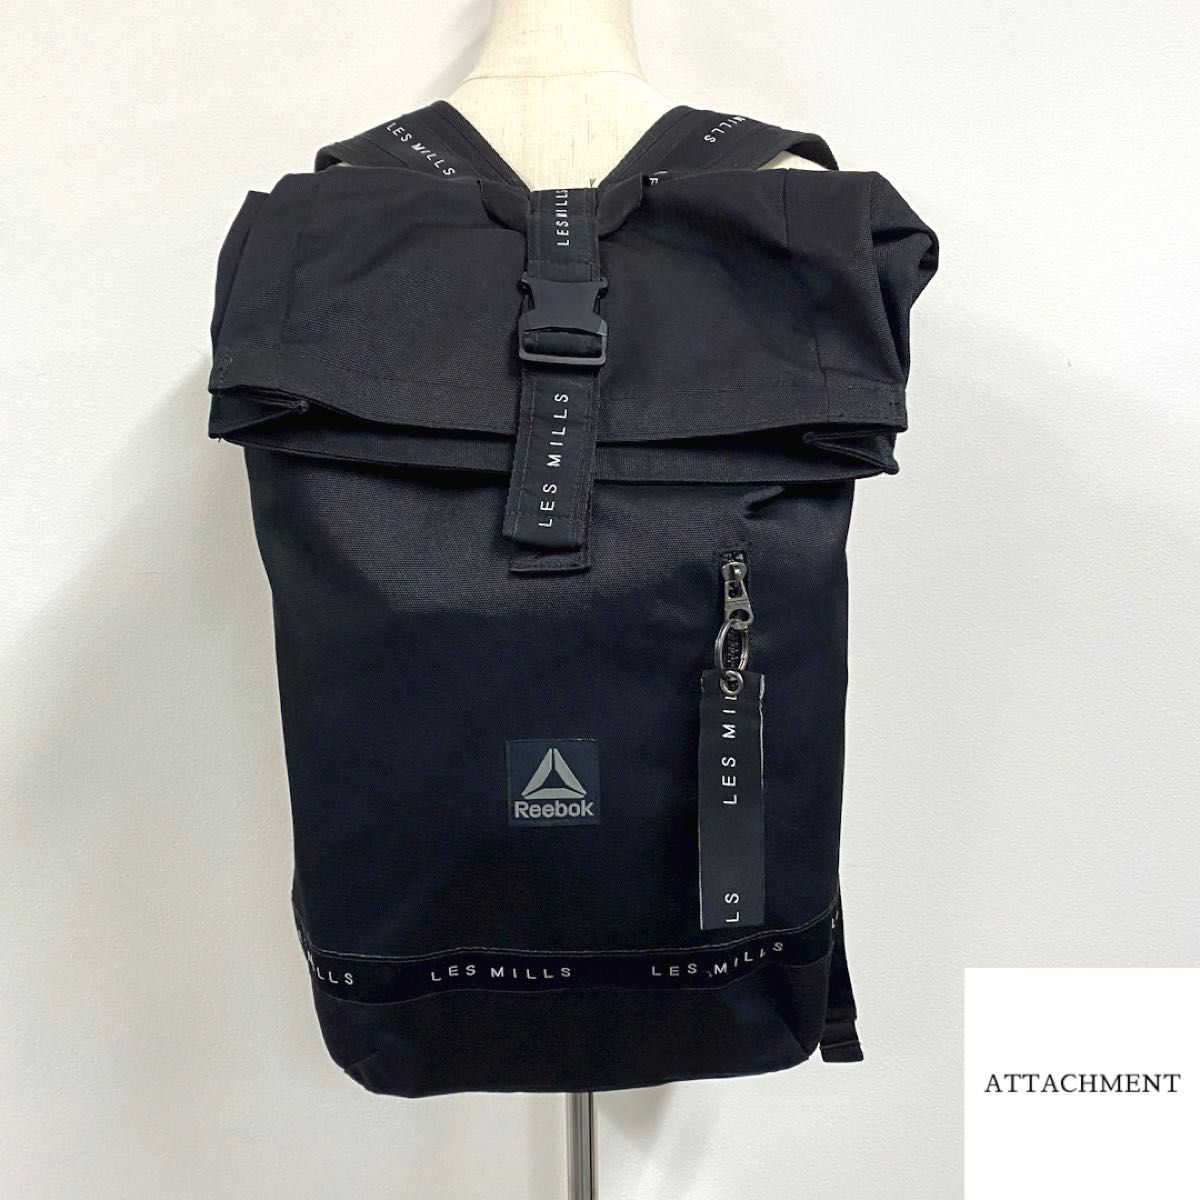 Reebok】リーボック レズミルズ バックパック LES MILLS Backpack リュックサック｜PayPayフリマ